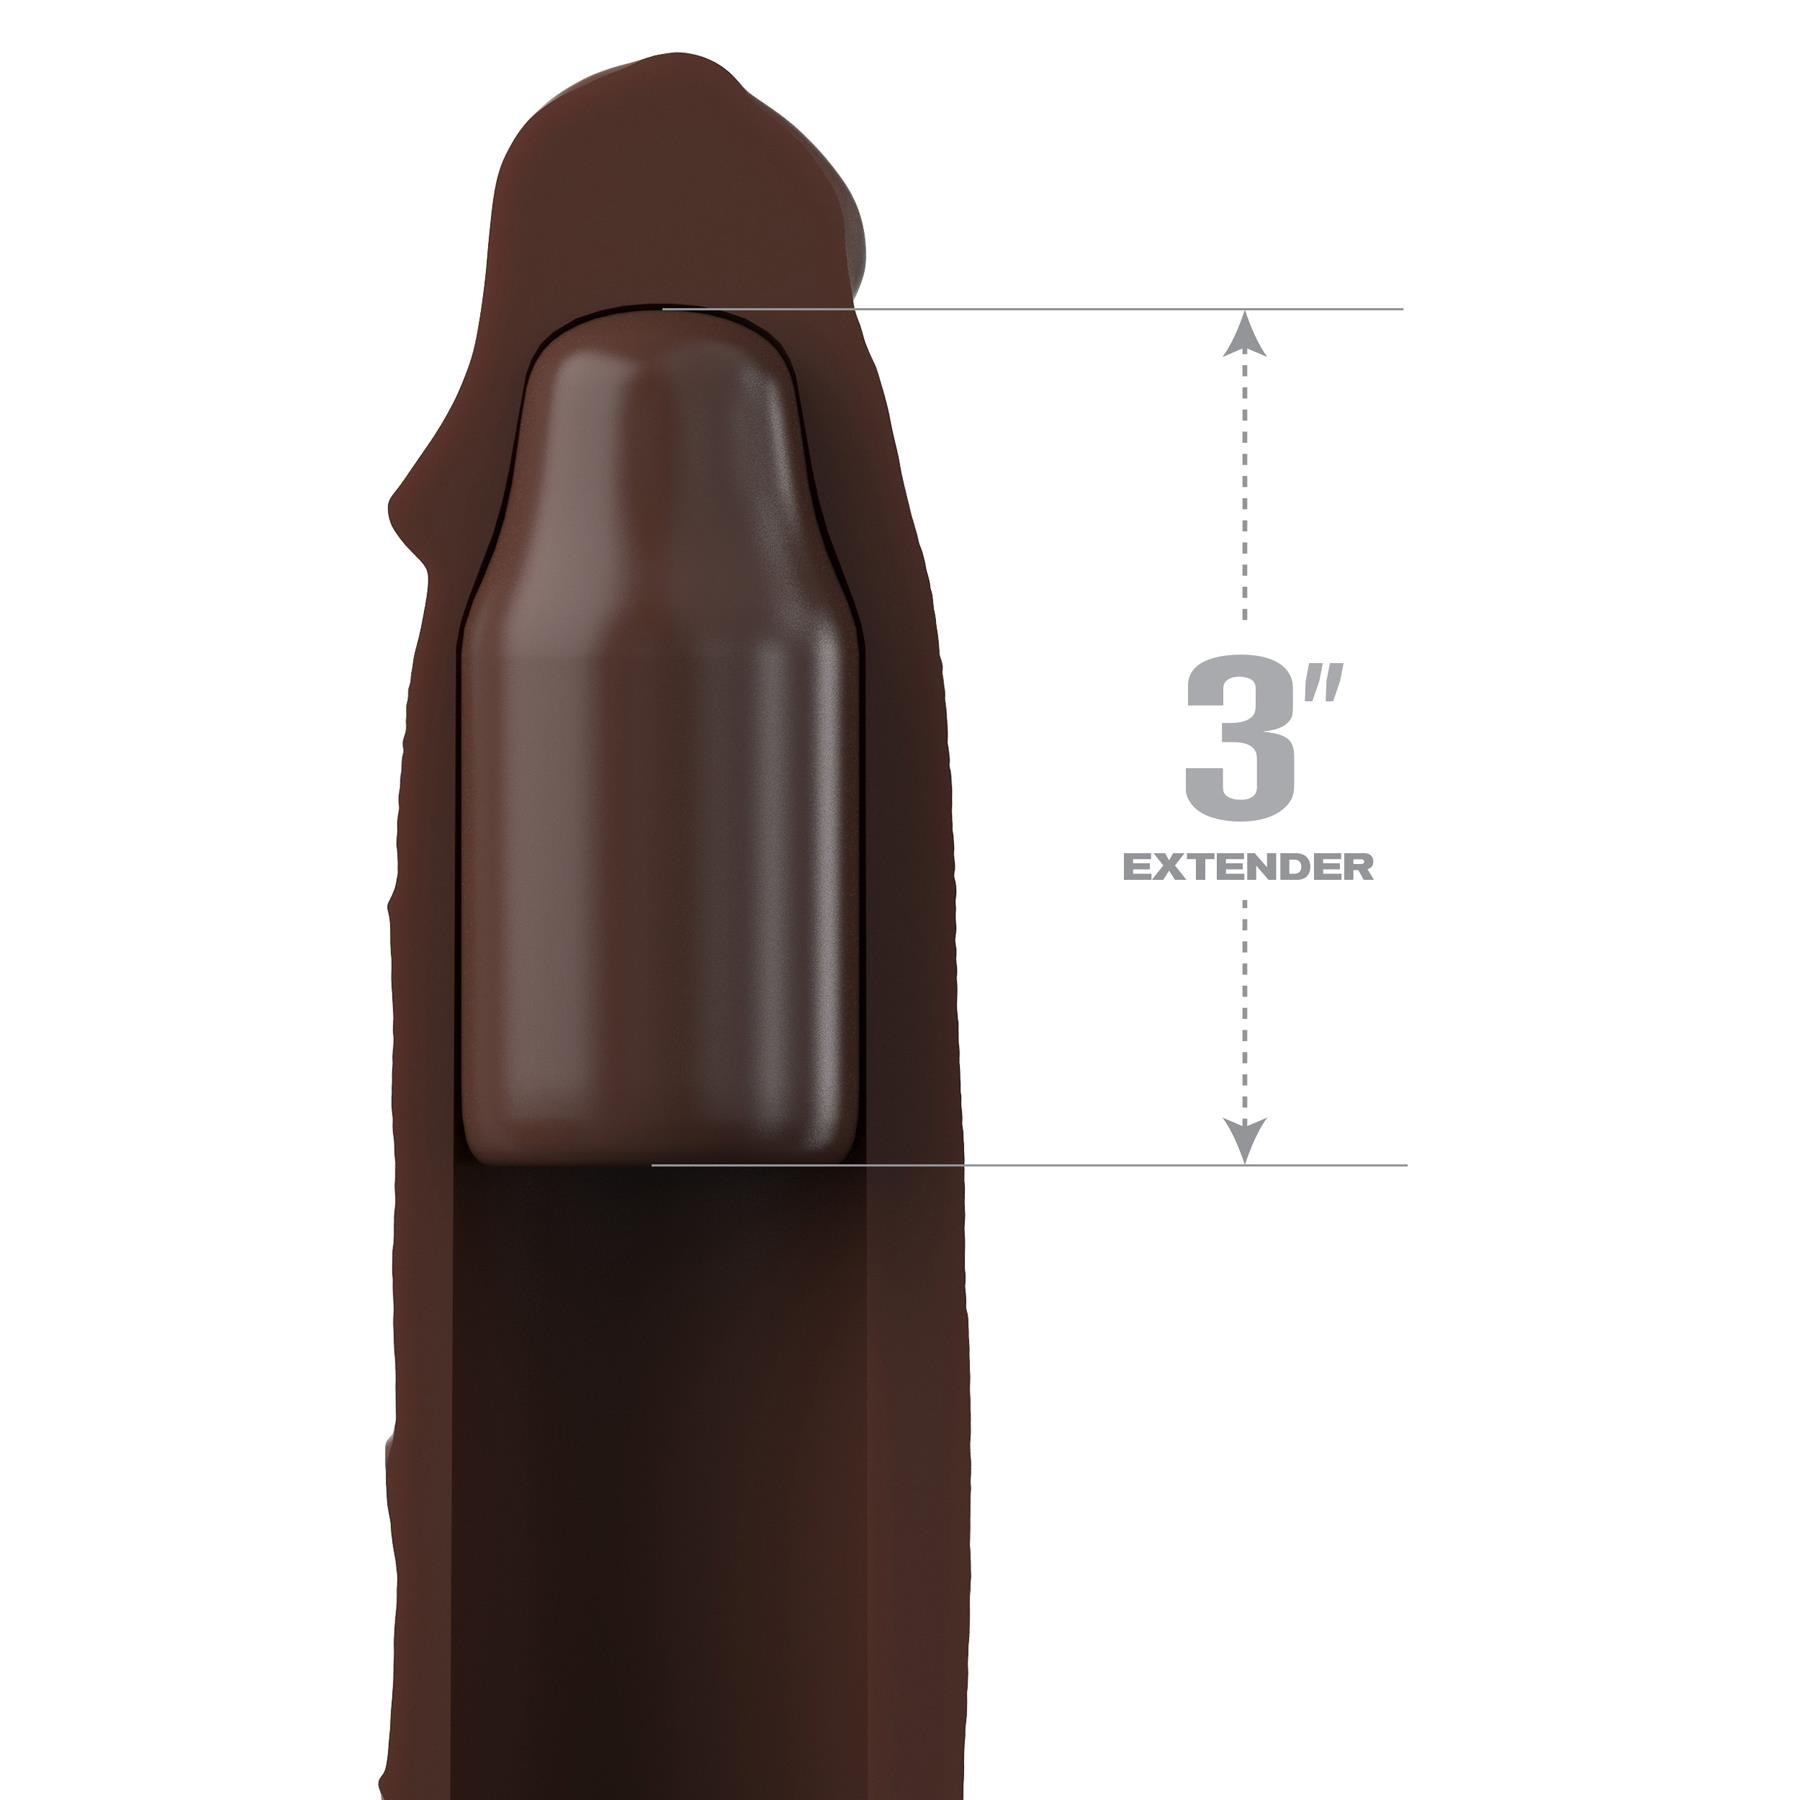 Fantasy X-Tensions Elite 3" Silicone Extension - Inside Showing Extension Tip - Brown